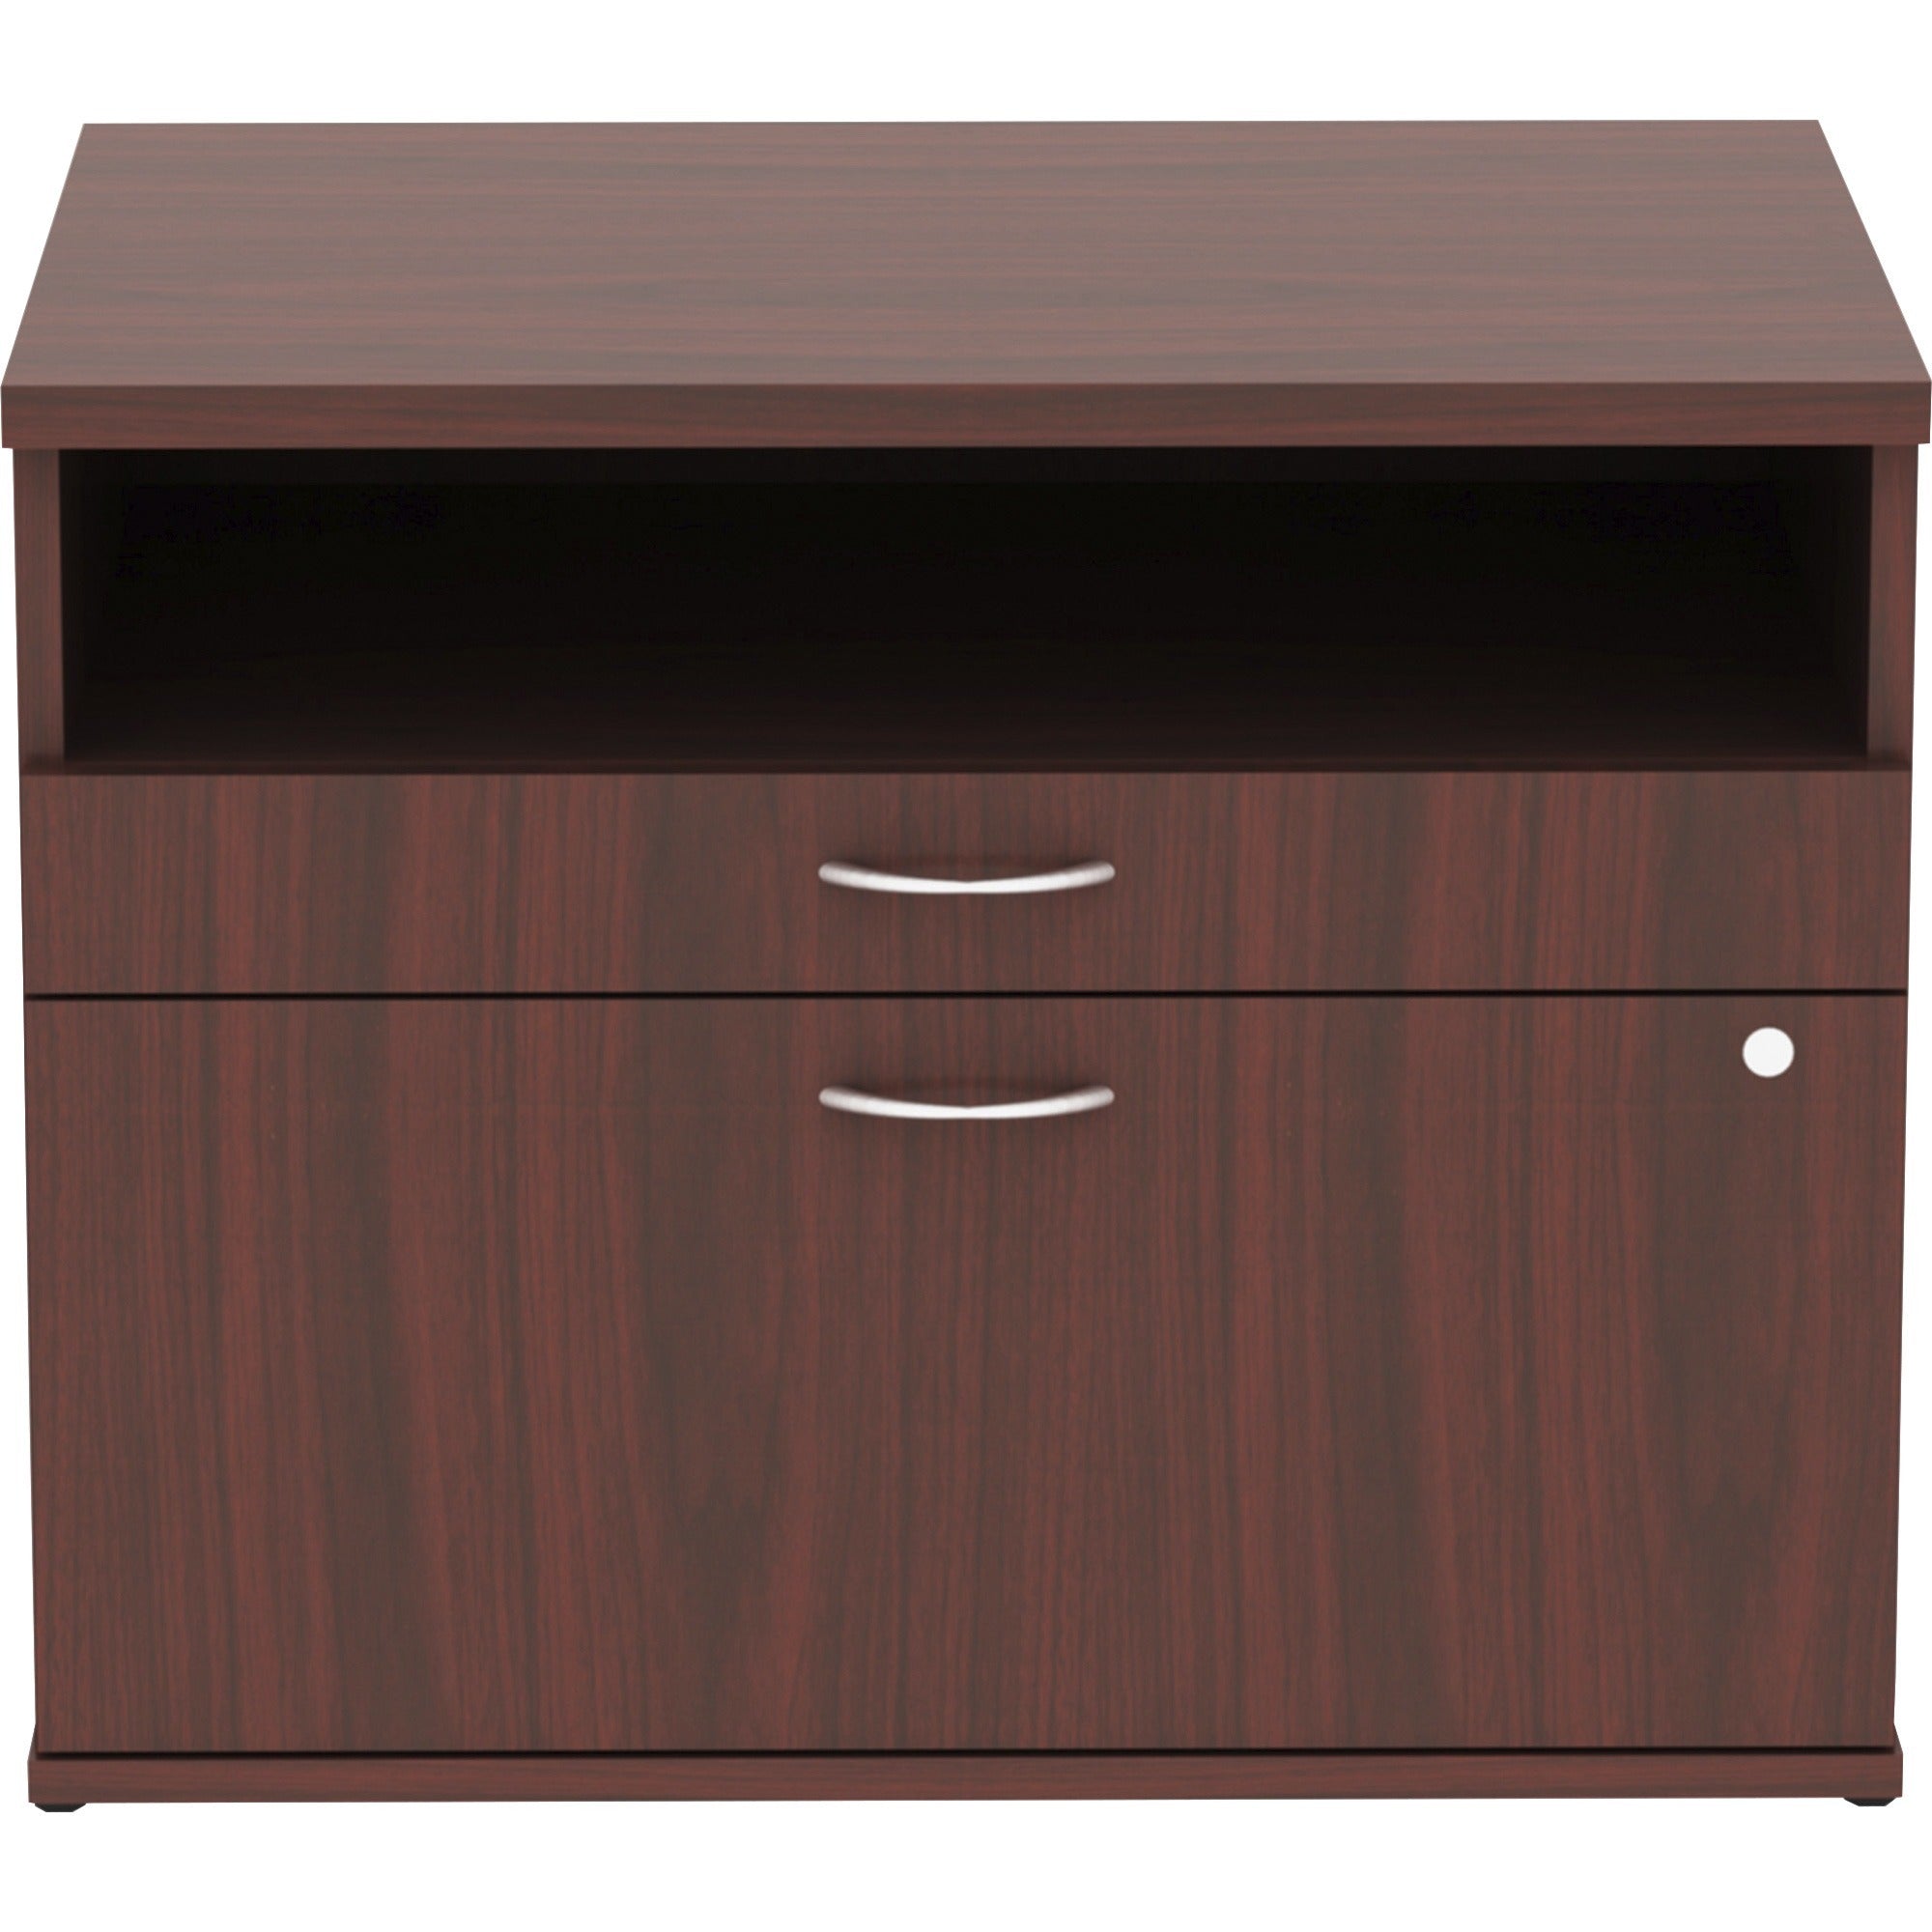 lorell-relevance-series-2-drawer-file-cabinet-credenza-w-open-shelf-295-x-22231-2-x-file-drawers-1-shelves-finish-mahogany-laminate_llr16212 - 2